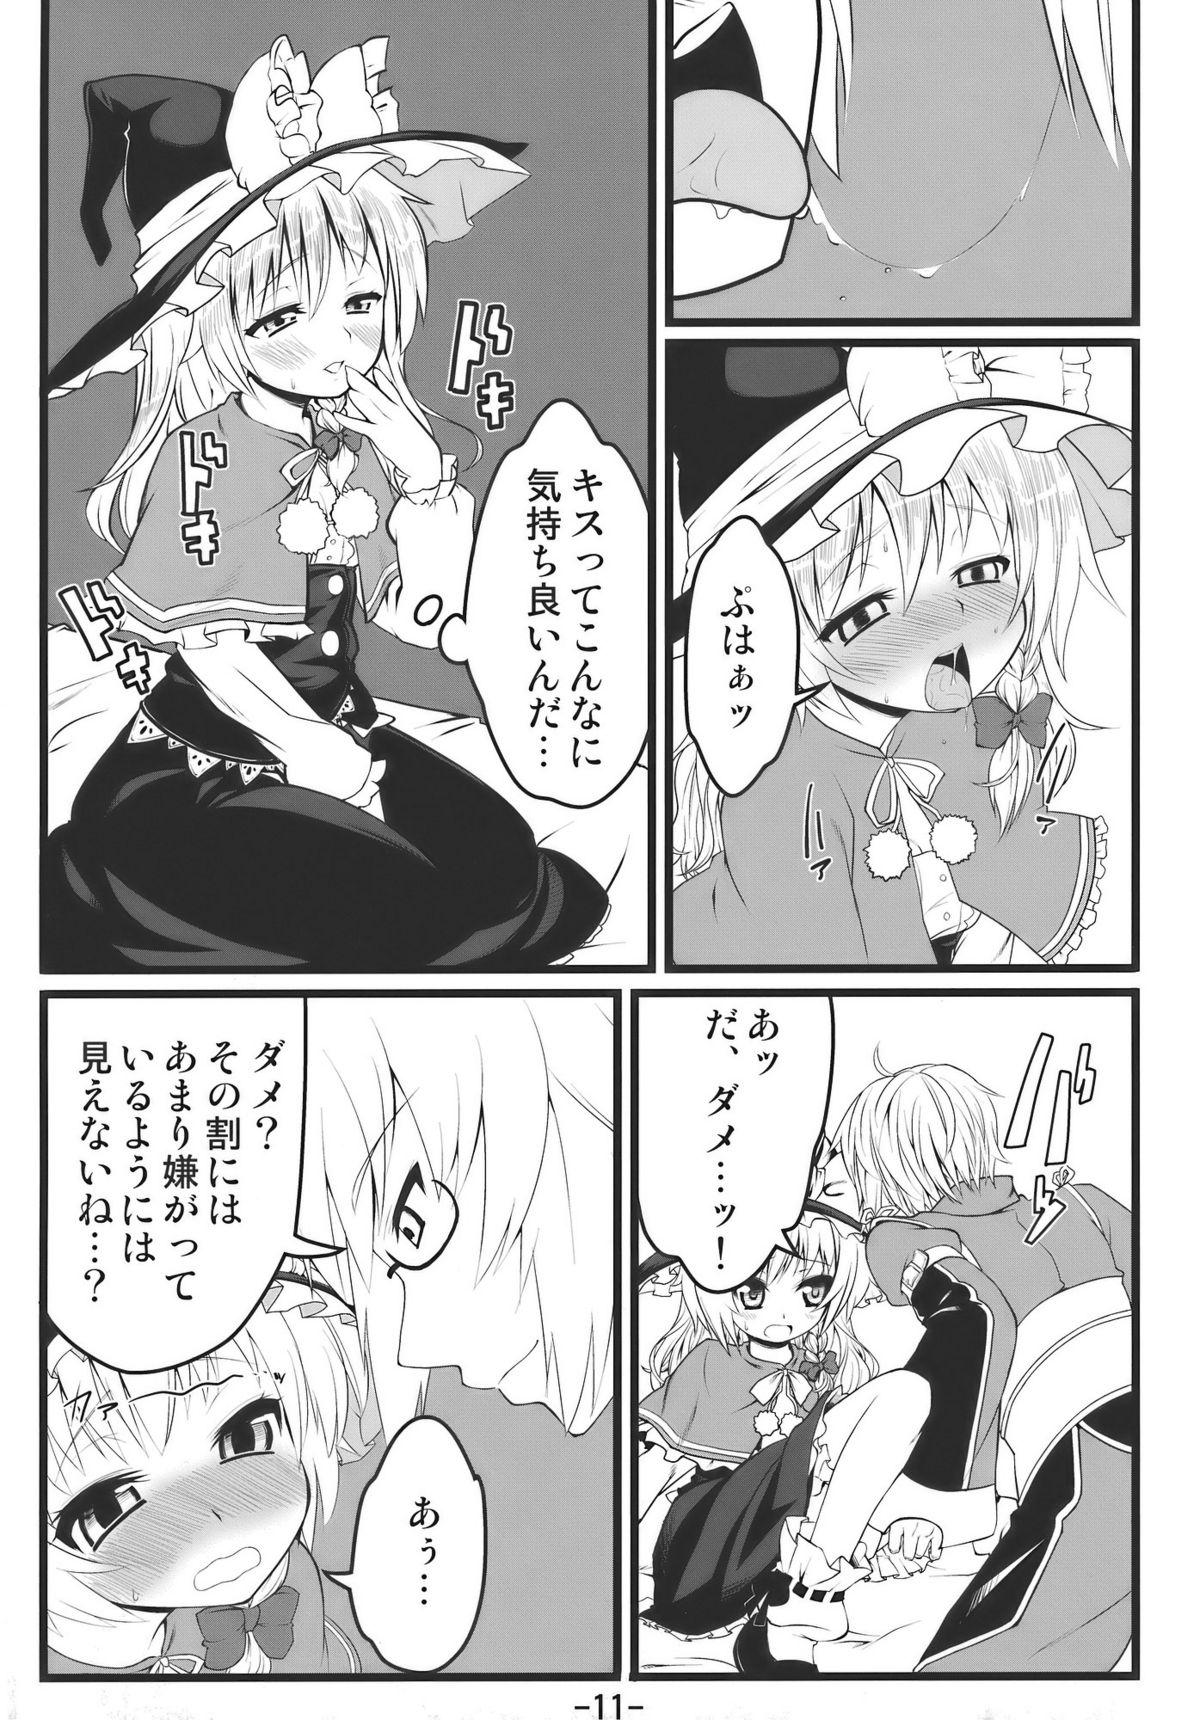 Socks Memory of Junk - Touhou project Pure 18 - Page 11